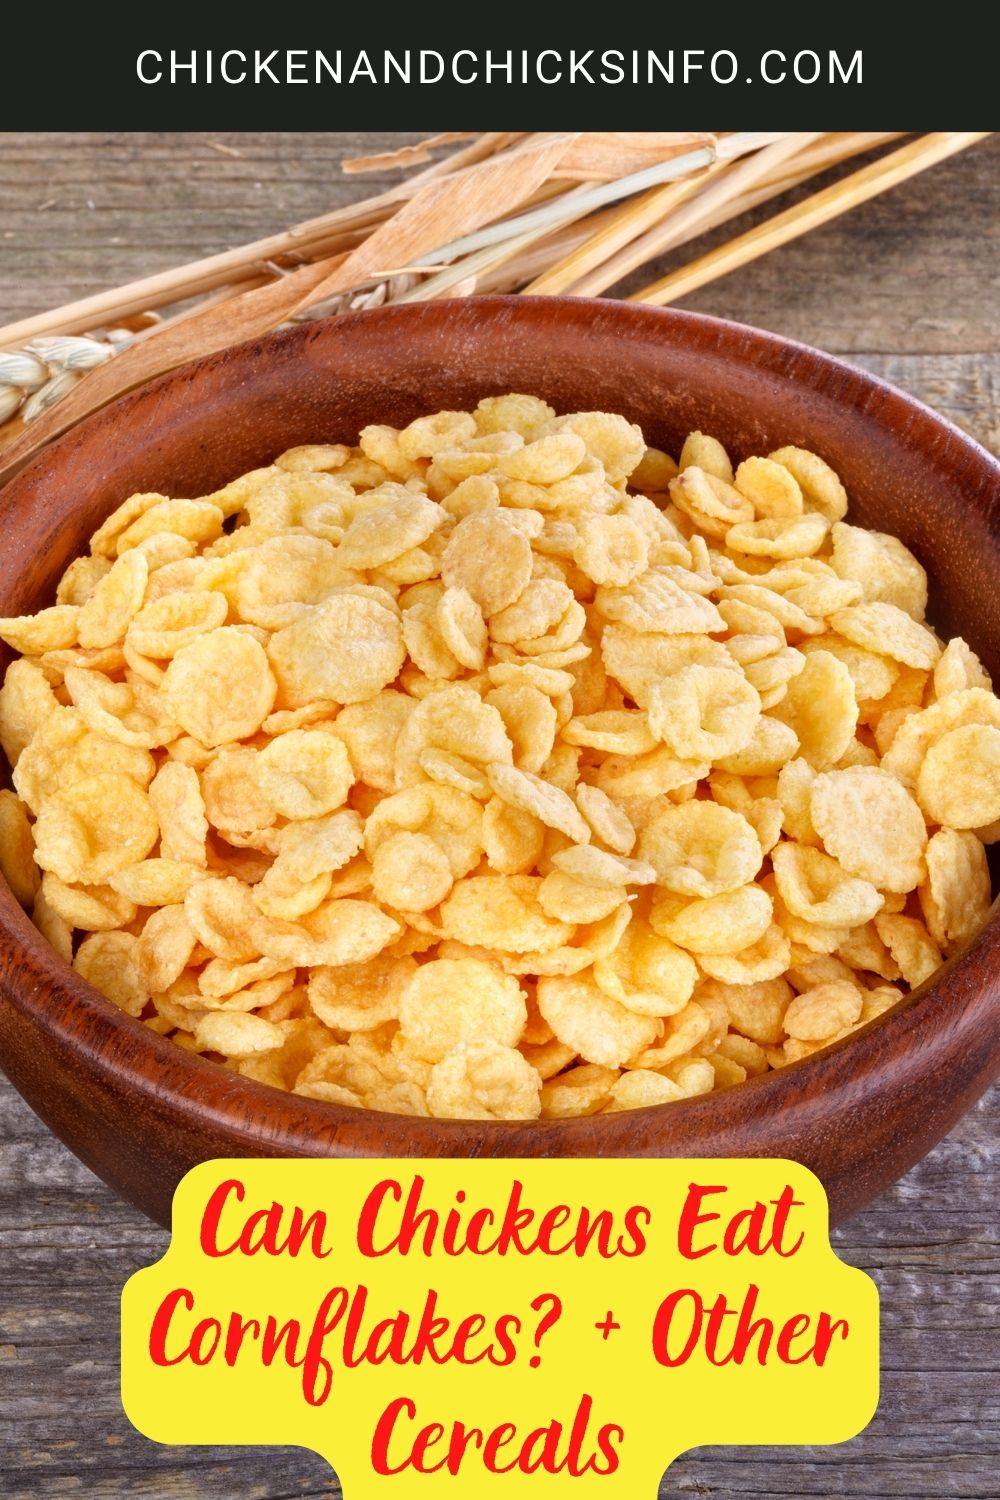 Can Chickens Eat Cornflakes? + Other Cereals poster.
